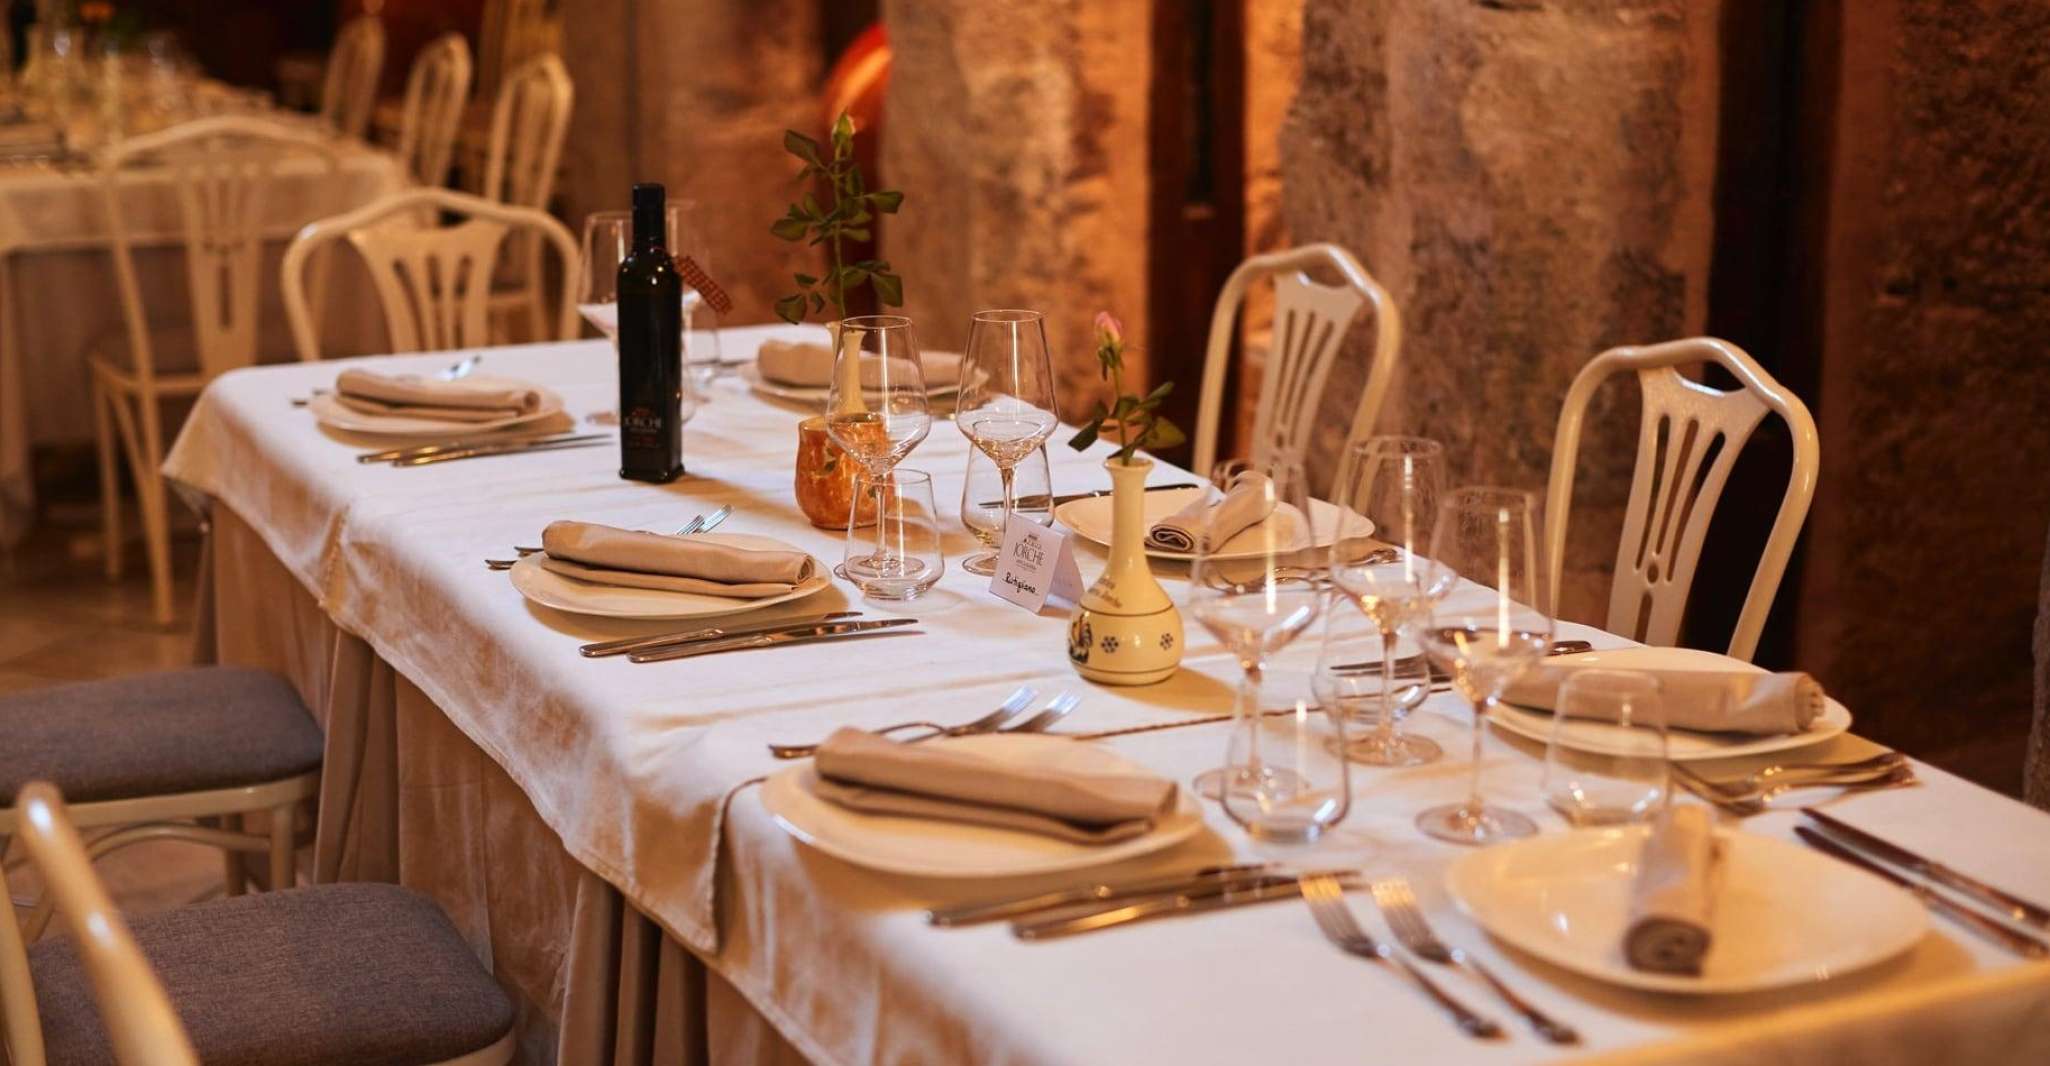 Wine Tour and Dinner, Puglia at the table - Housity